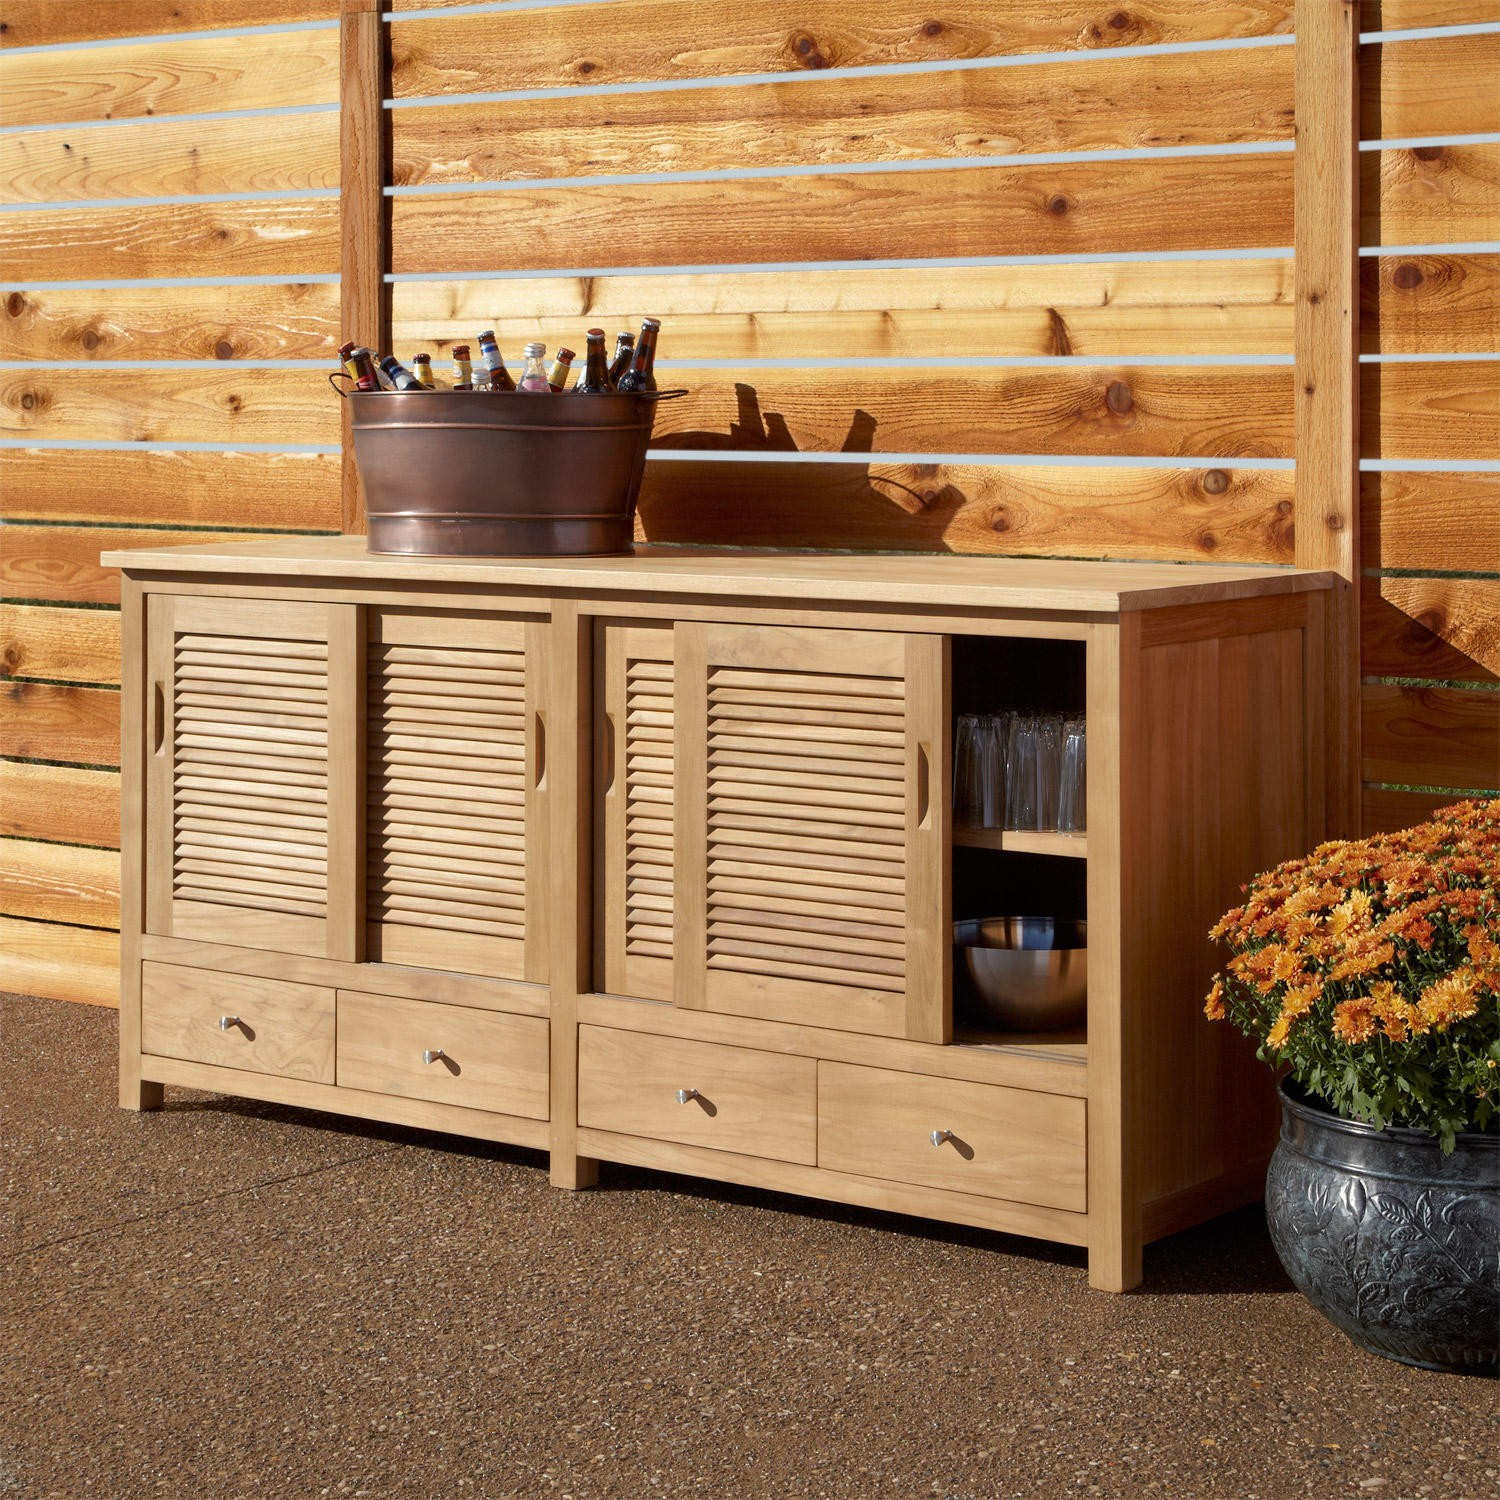 Build Outdoor Kitchen Cabinet
 The Various Re mendations and Ideas of the Materials of